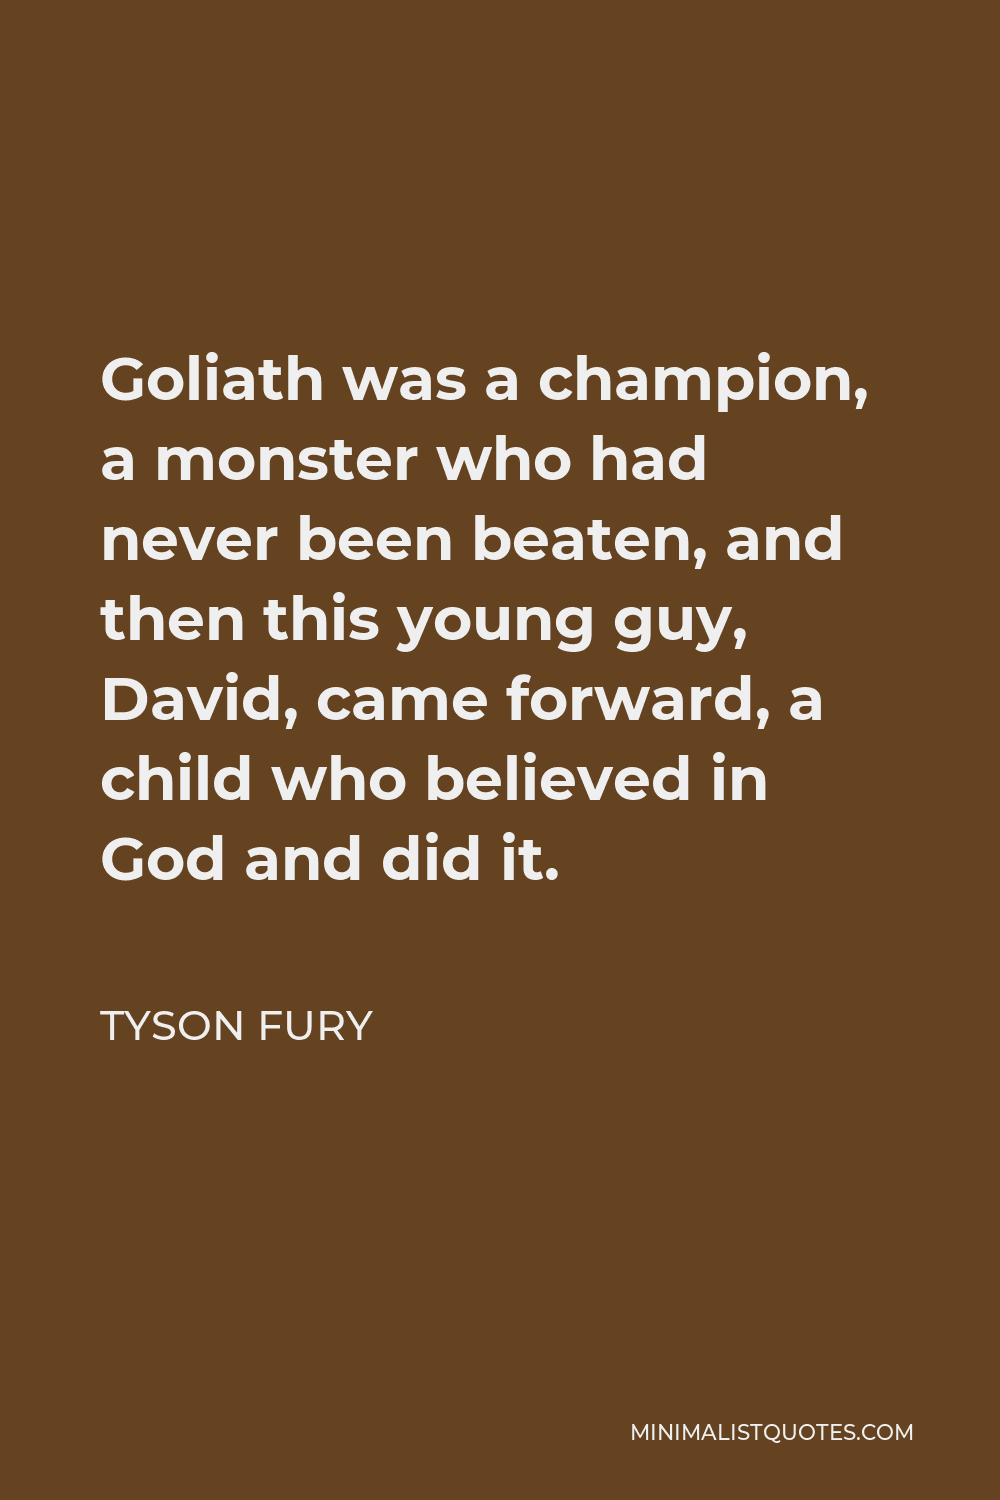 Tyson Fury Quote - Goliath was a champion, a monster who had never been beaten, and then this young guy, David, came forward, a child who believed in God and did it.